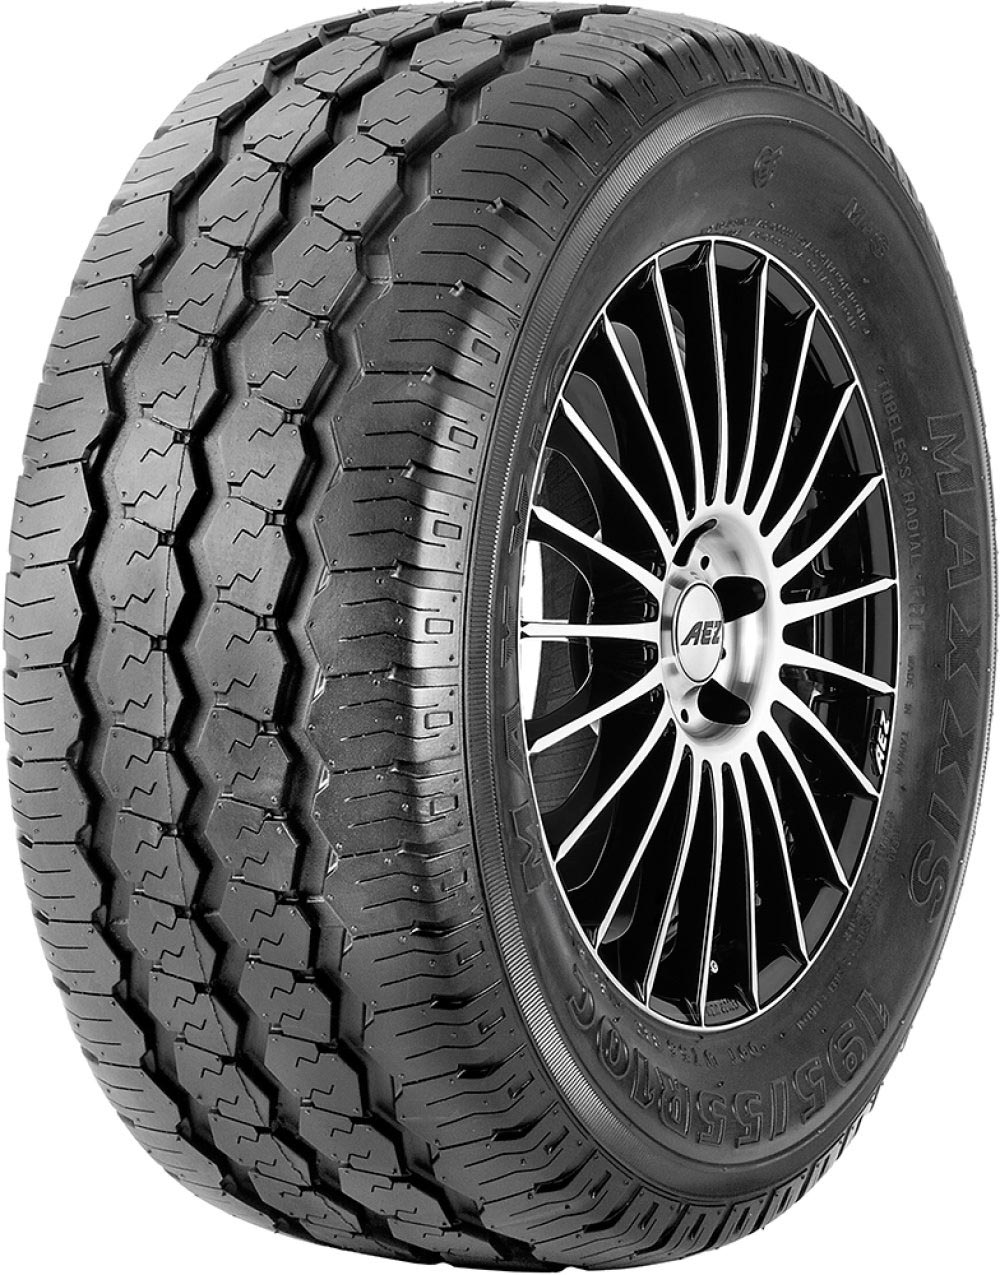 Anvelope microbuz MAXXIS -966N 195/55 R10 98P